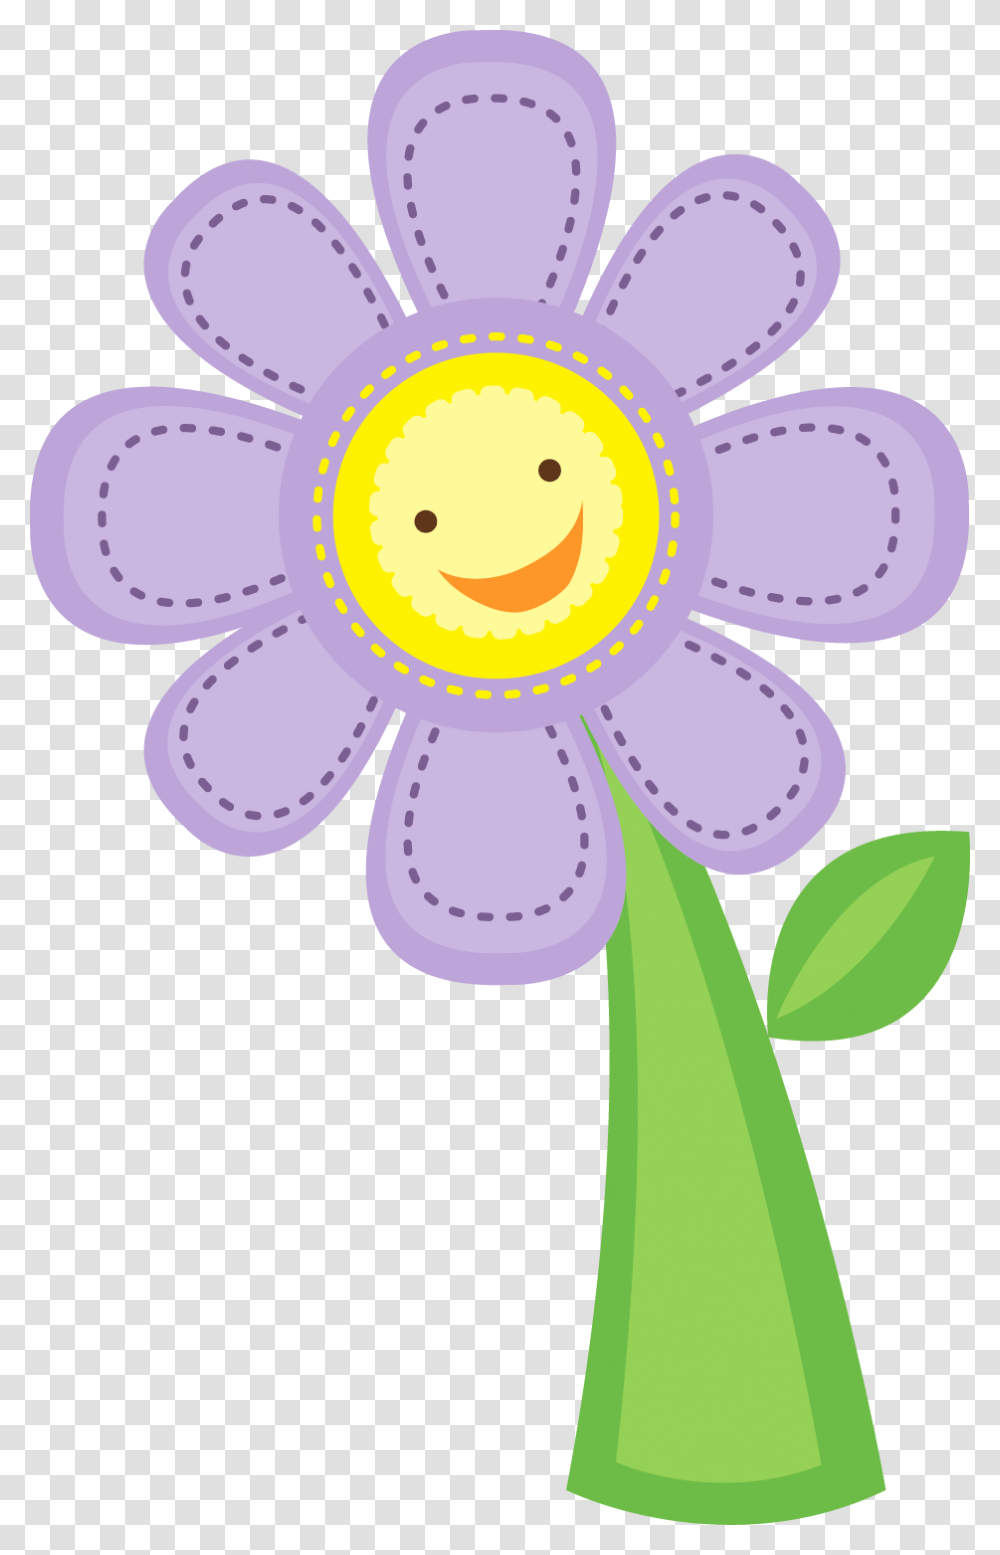 Baby Flower Clipart Vector Free Stock Alice In Babyland Jardim Encantado Flor, Daisy, Plant, Daisies, Blossom Transparent Png